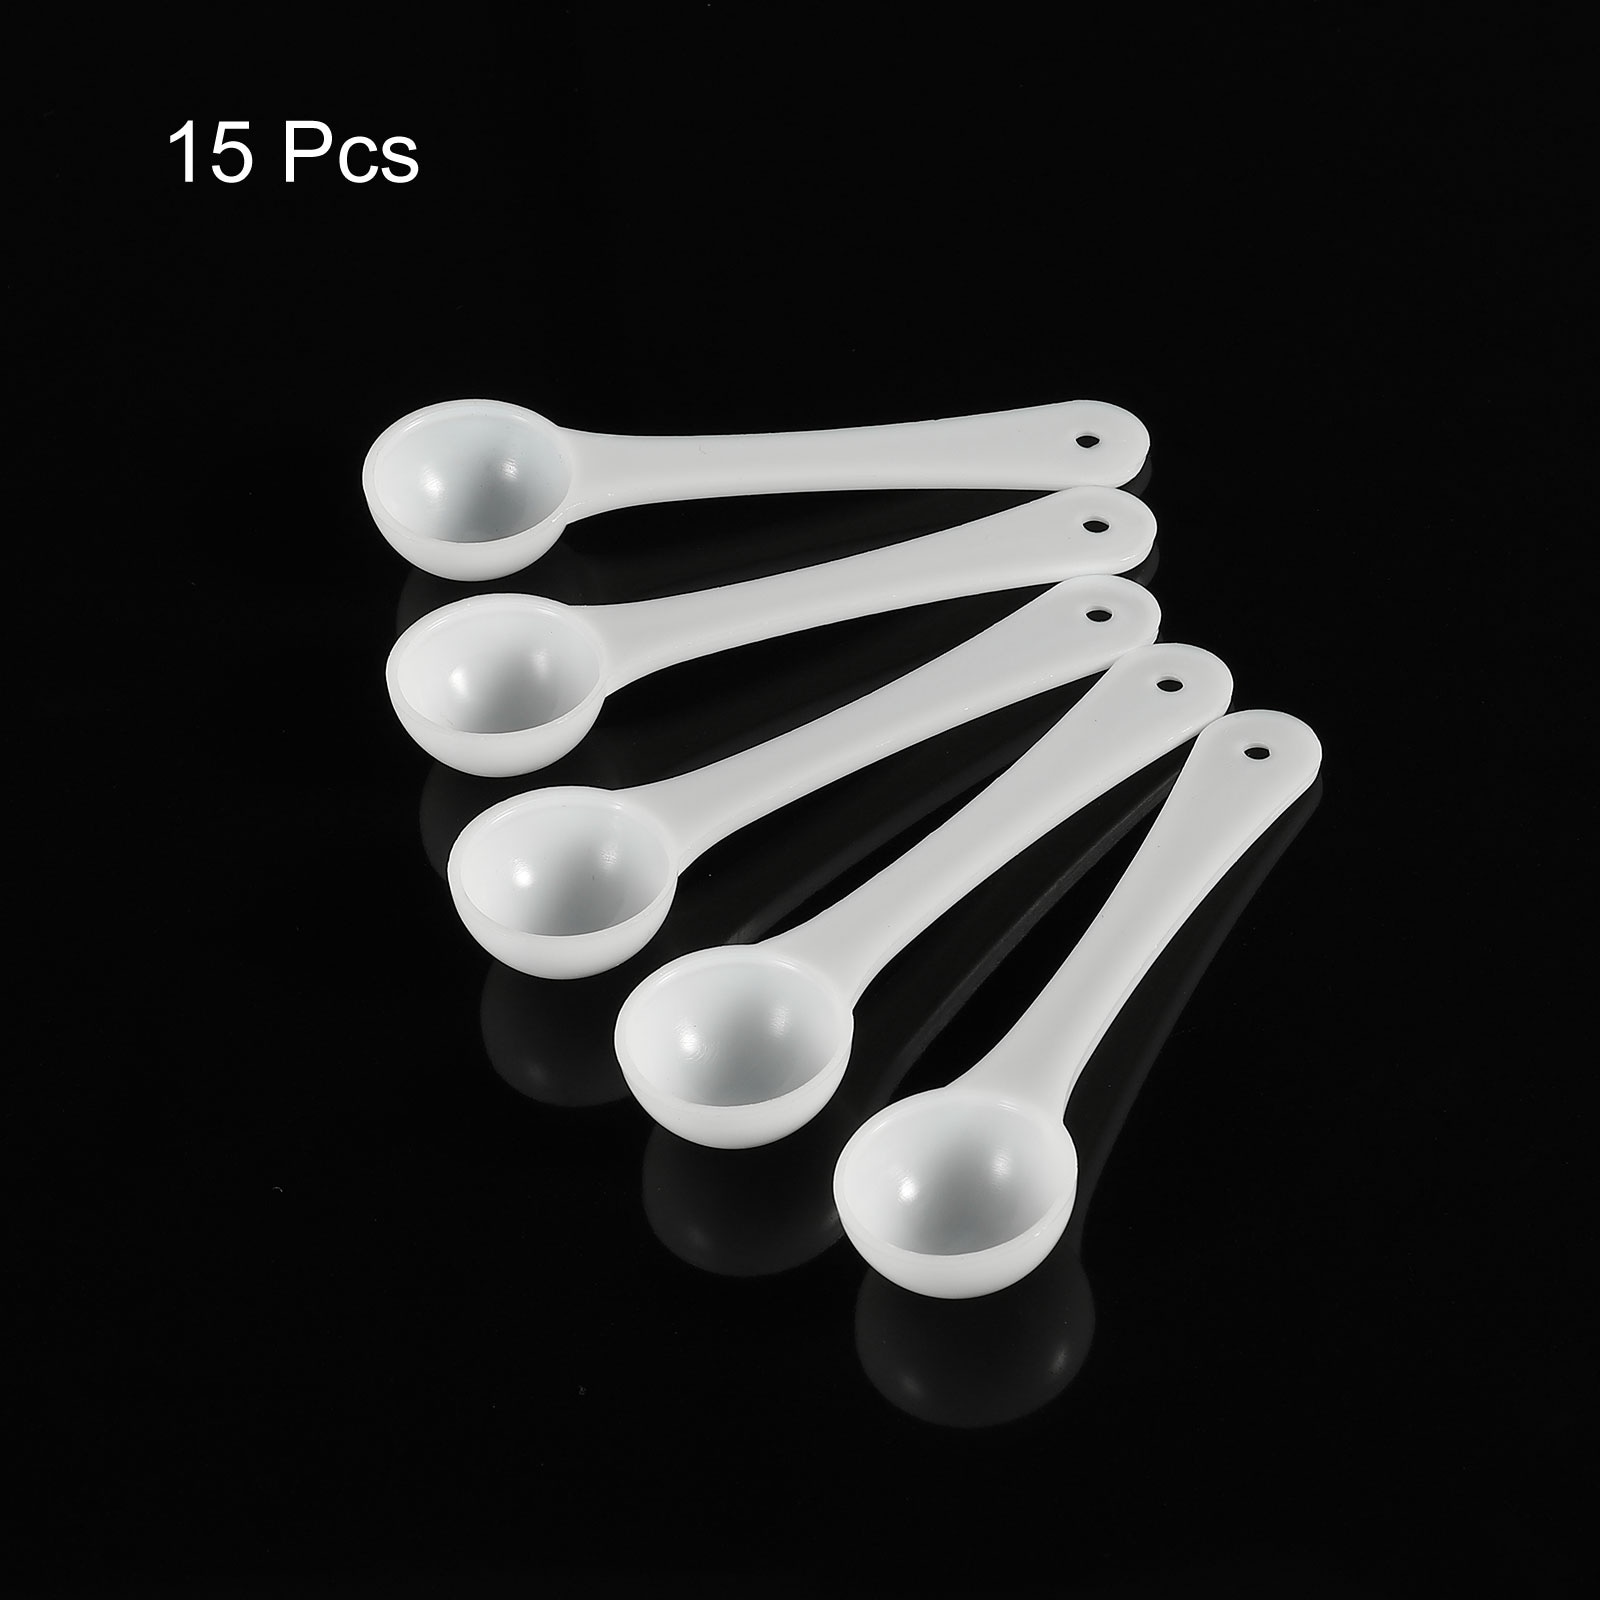 https://ak1.ostkcdn.com/images/products/is/images/direct/4c7df5c60edbce0339f0fd59b698f5935acc7b52/Micro-Spoons-1-Gram-Measuring-Scoop-Plastic-Round-Bottom-with-Hanging-Hole-15Pcs.jpg